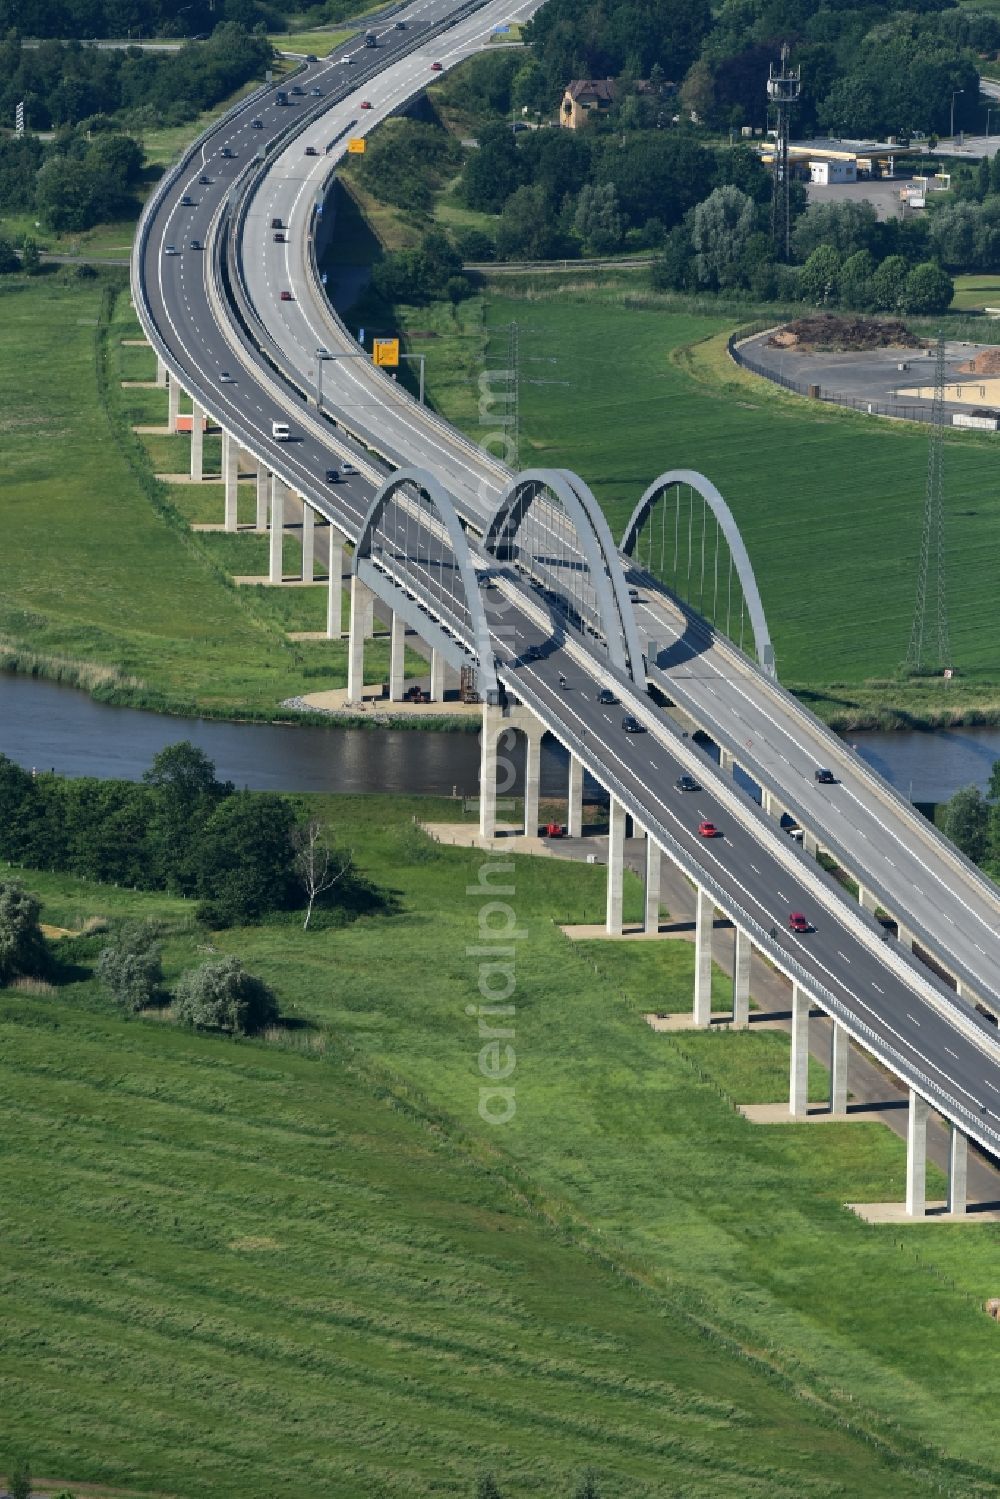 Itzehoe from the bird's eye view: Routing and lanes over the motorway bridge the BAB A23 on the banks of the Stoer River in Itzehoe in Schleswig-Holstein